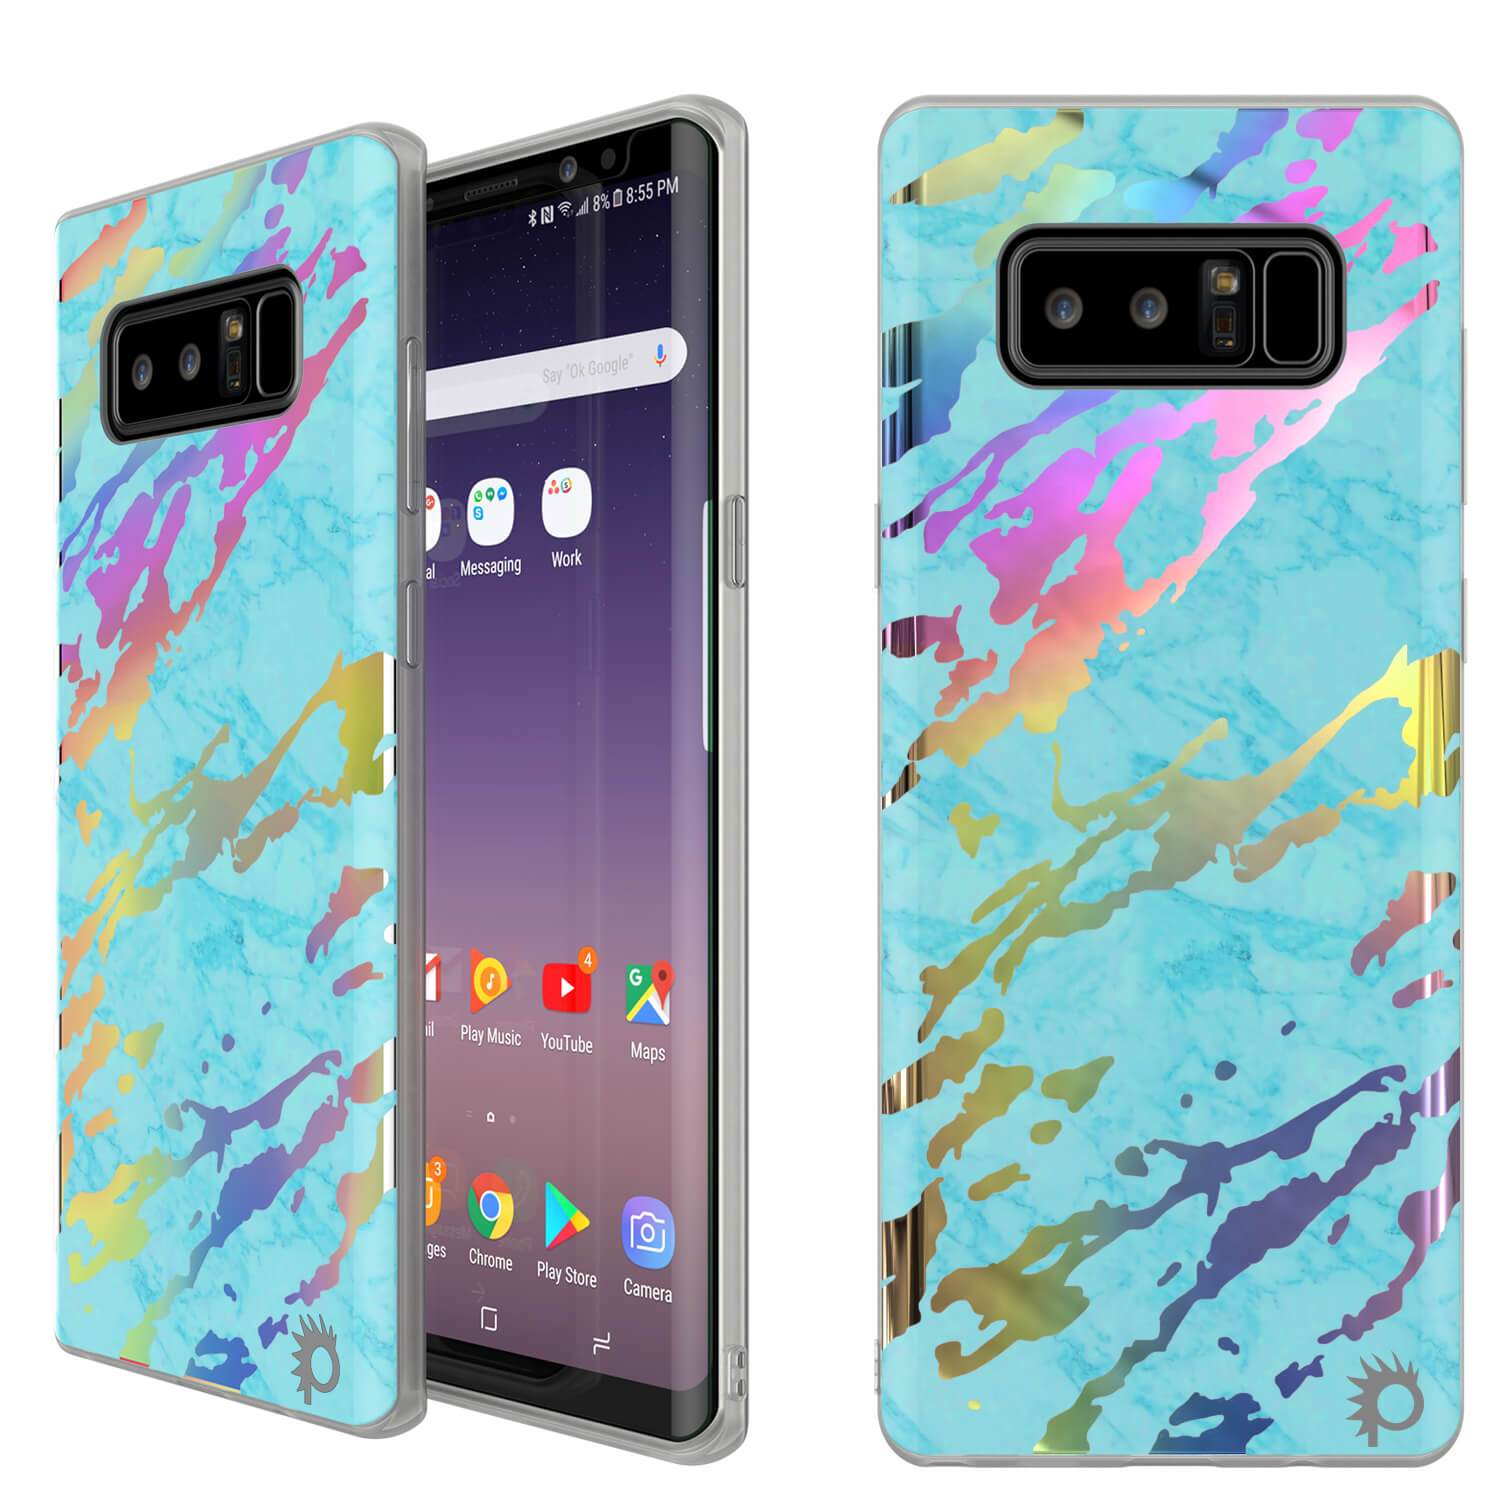 Punkcase Galaxy Note 8 Marble Case, Protective Full Body Cover W/PunkShield Screen Protector (Teal Onyx)